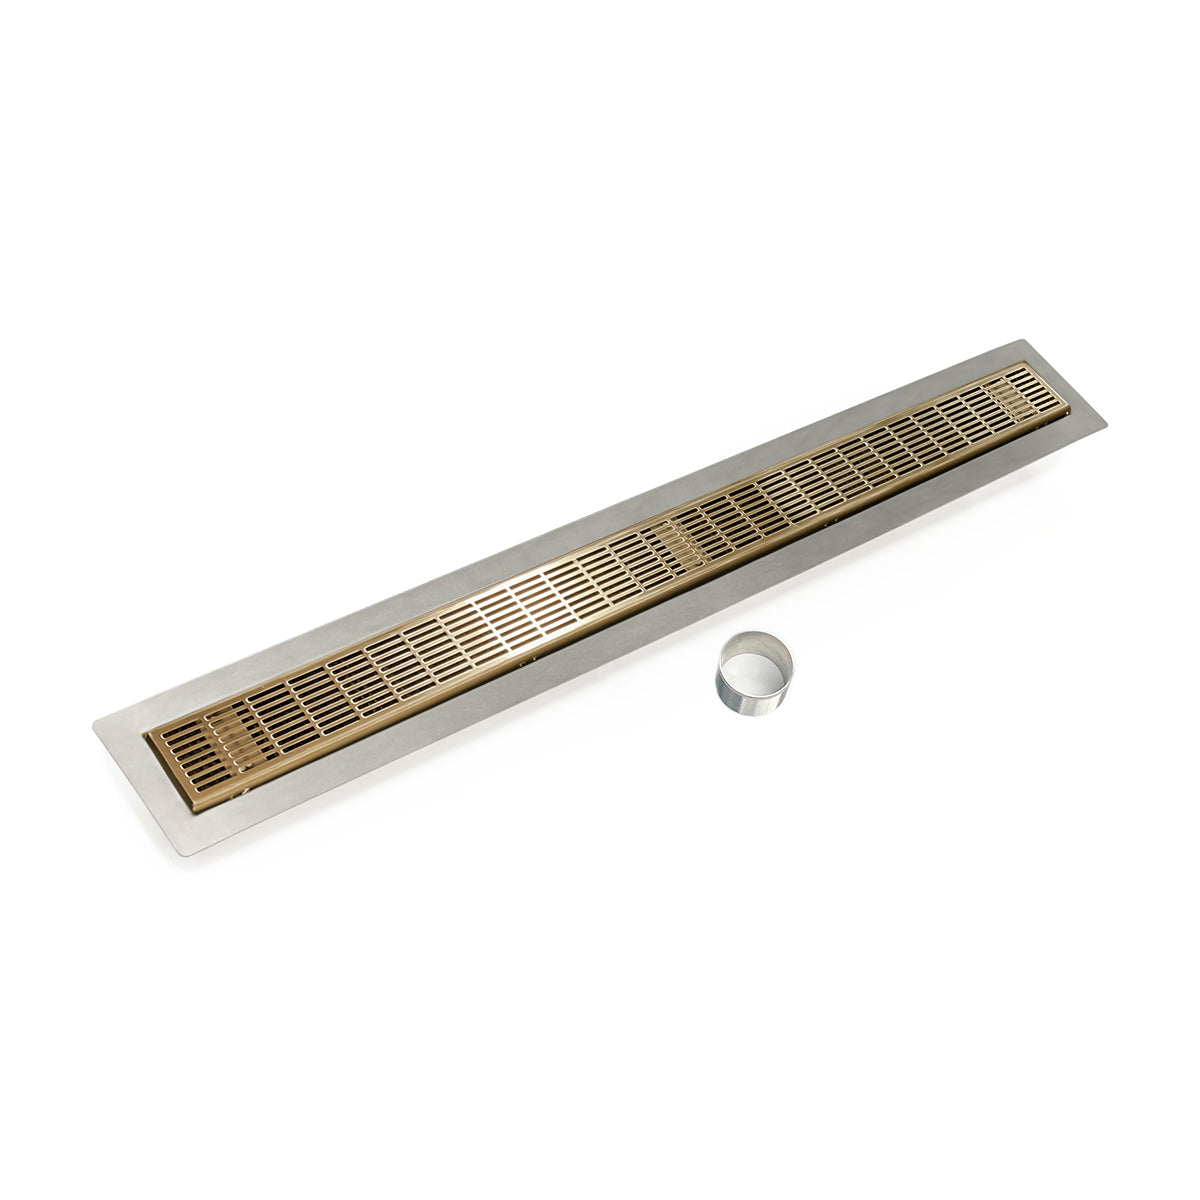 Infinity Drain 36" FCB Series Double Waterproofing Linear Drain Kit with 2 1/2" Perforated Slotted Grate